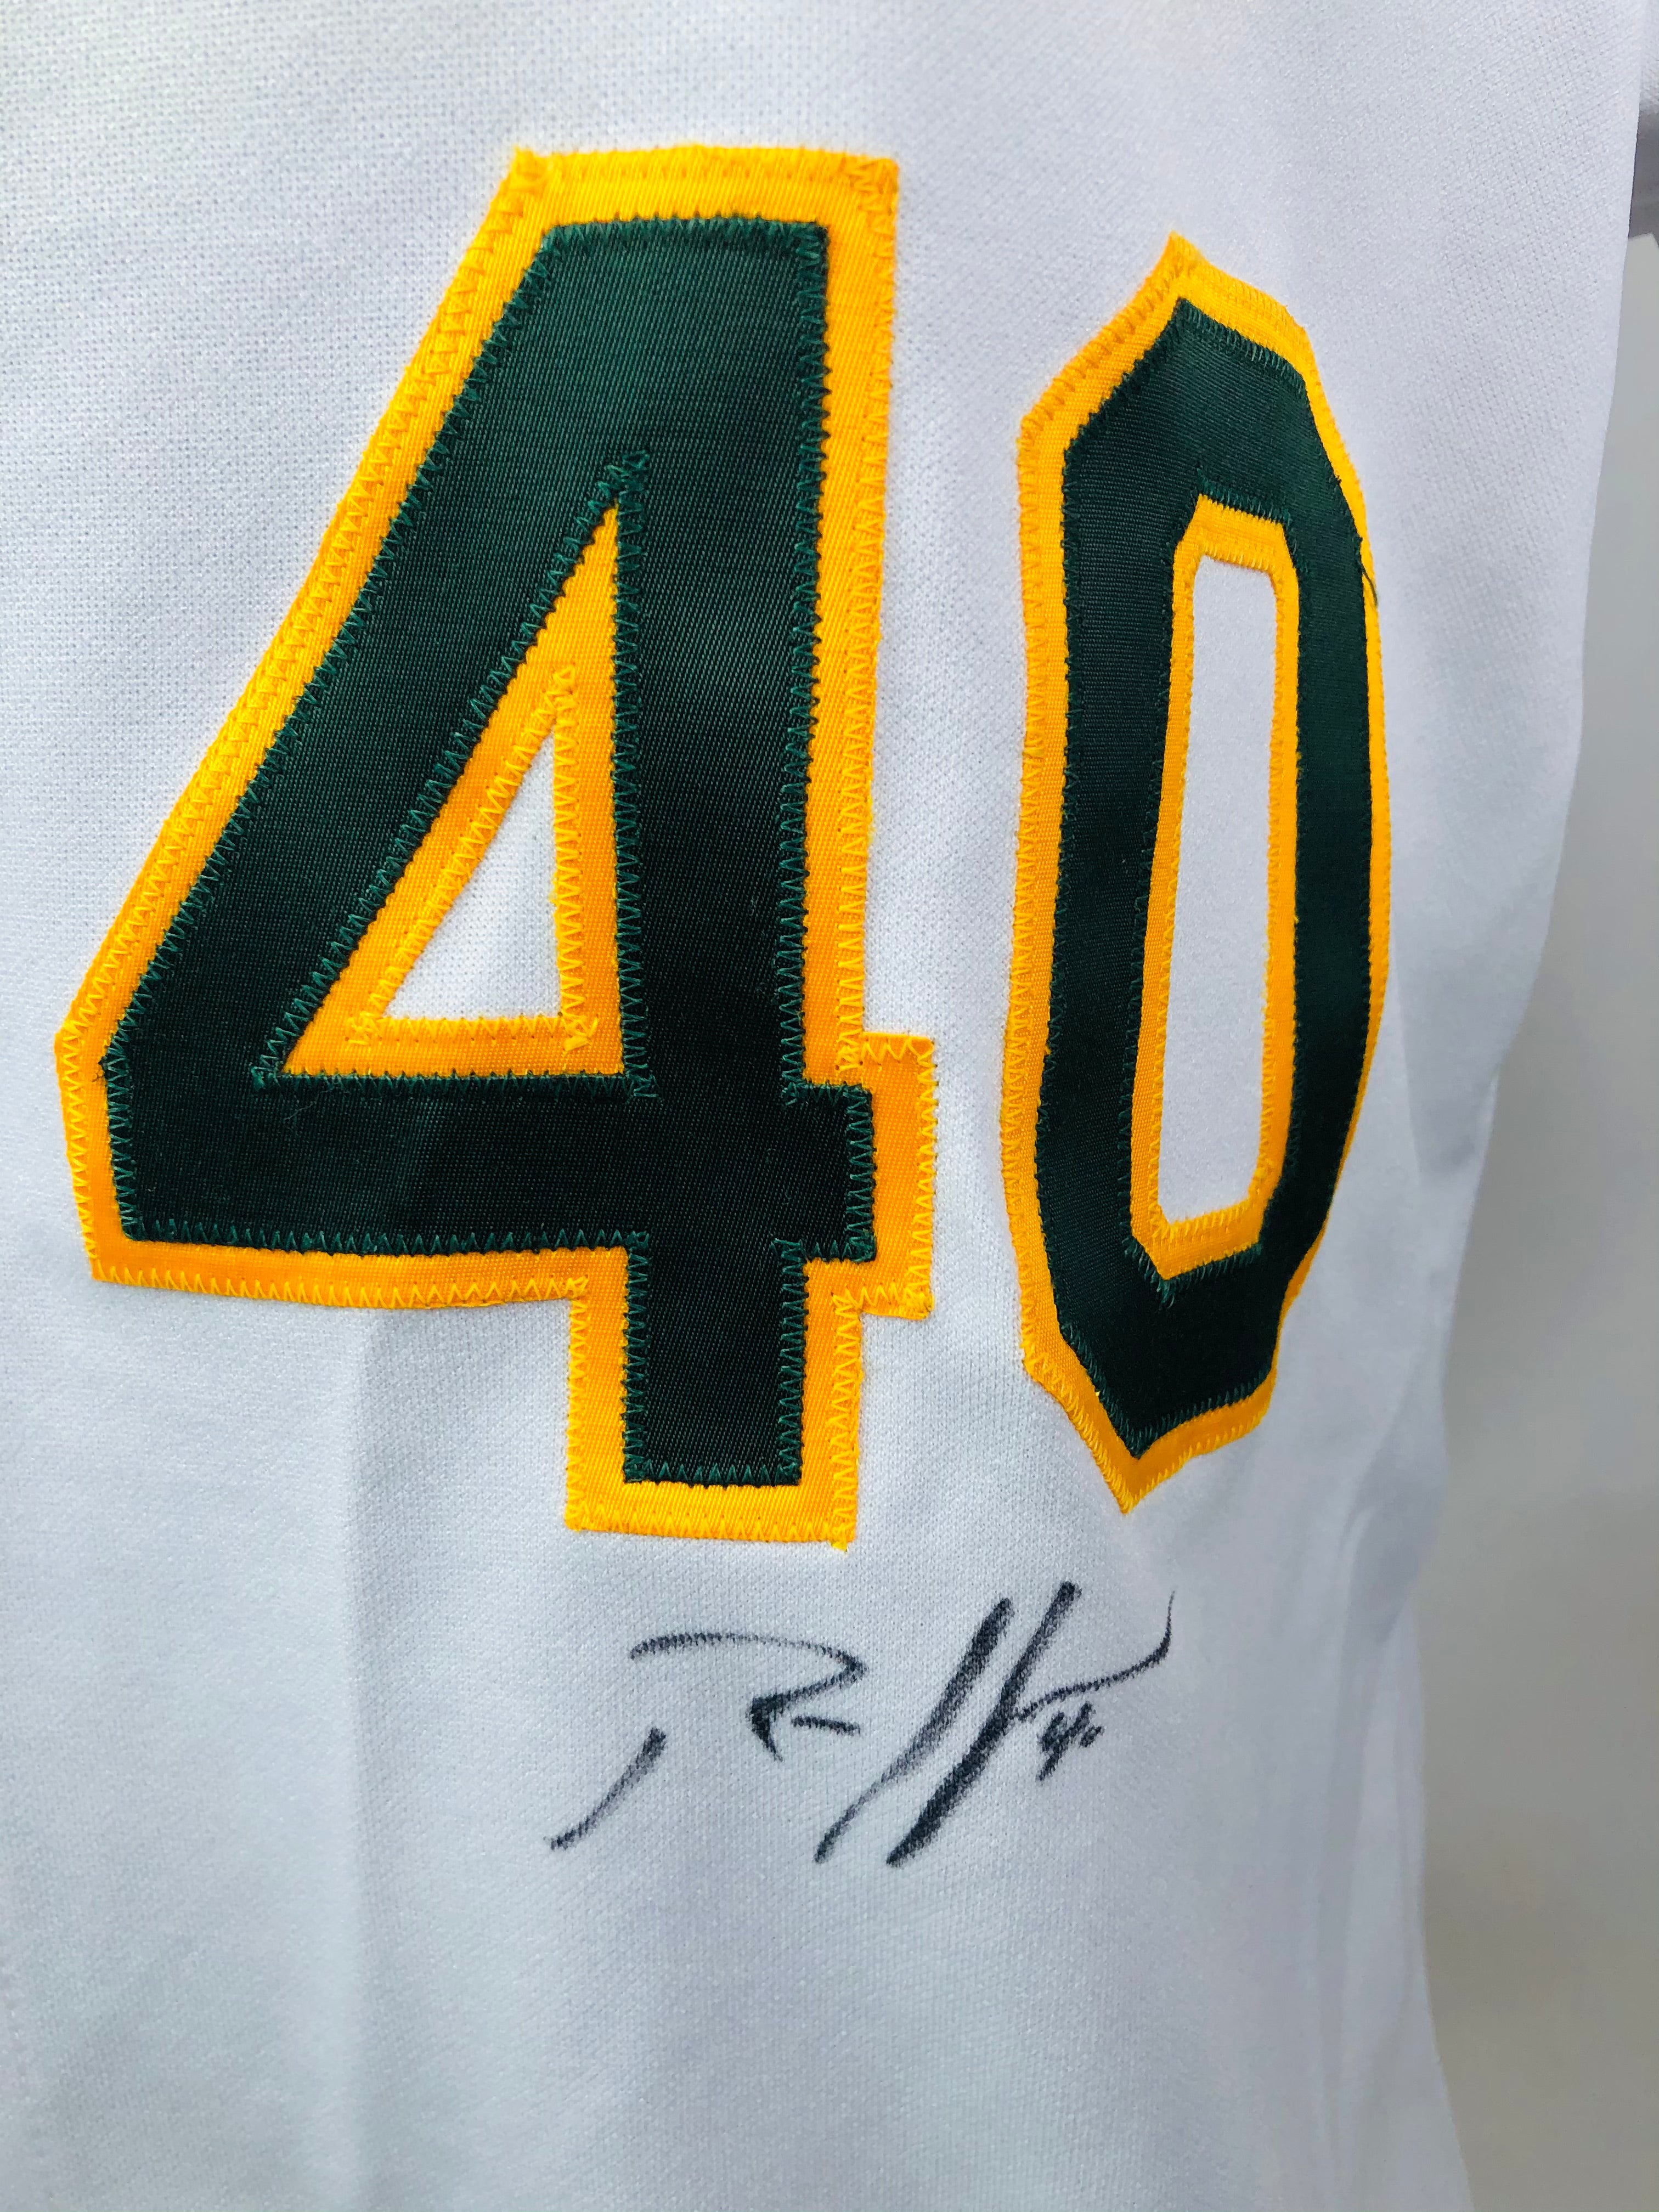 Oakland Athletics Blank Game Issued Yellow Jersey 46 DP48512